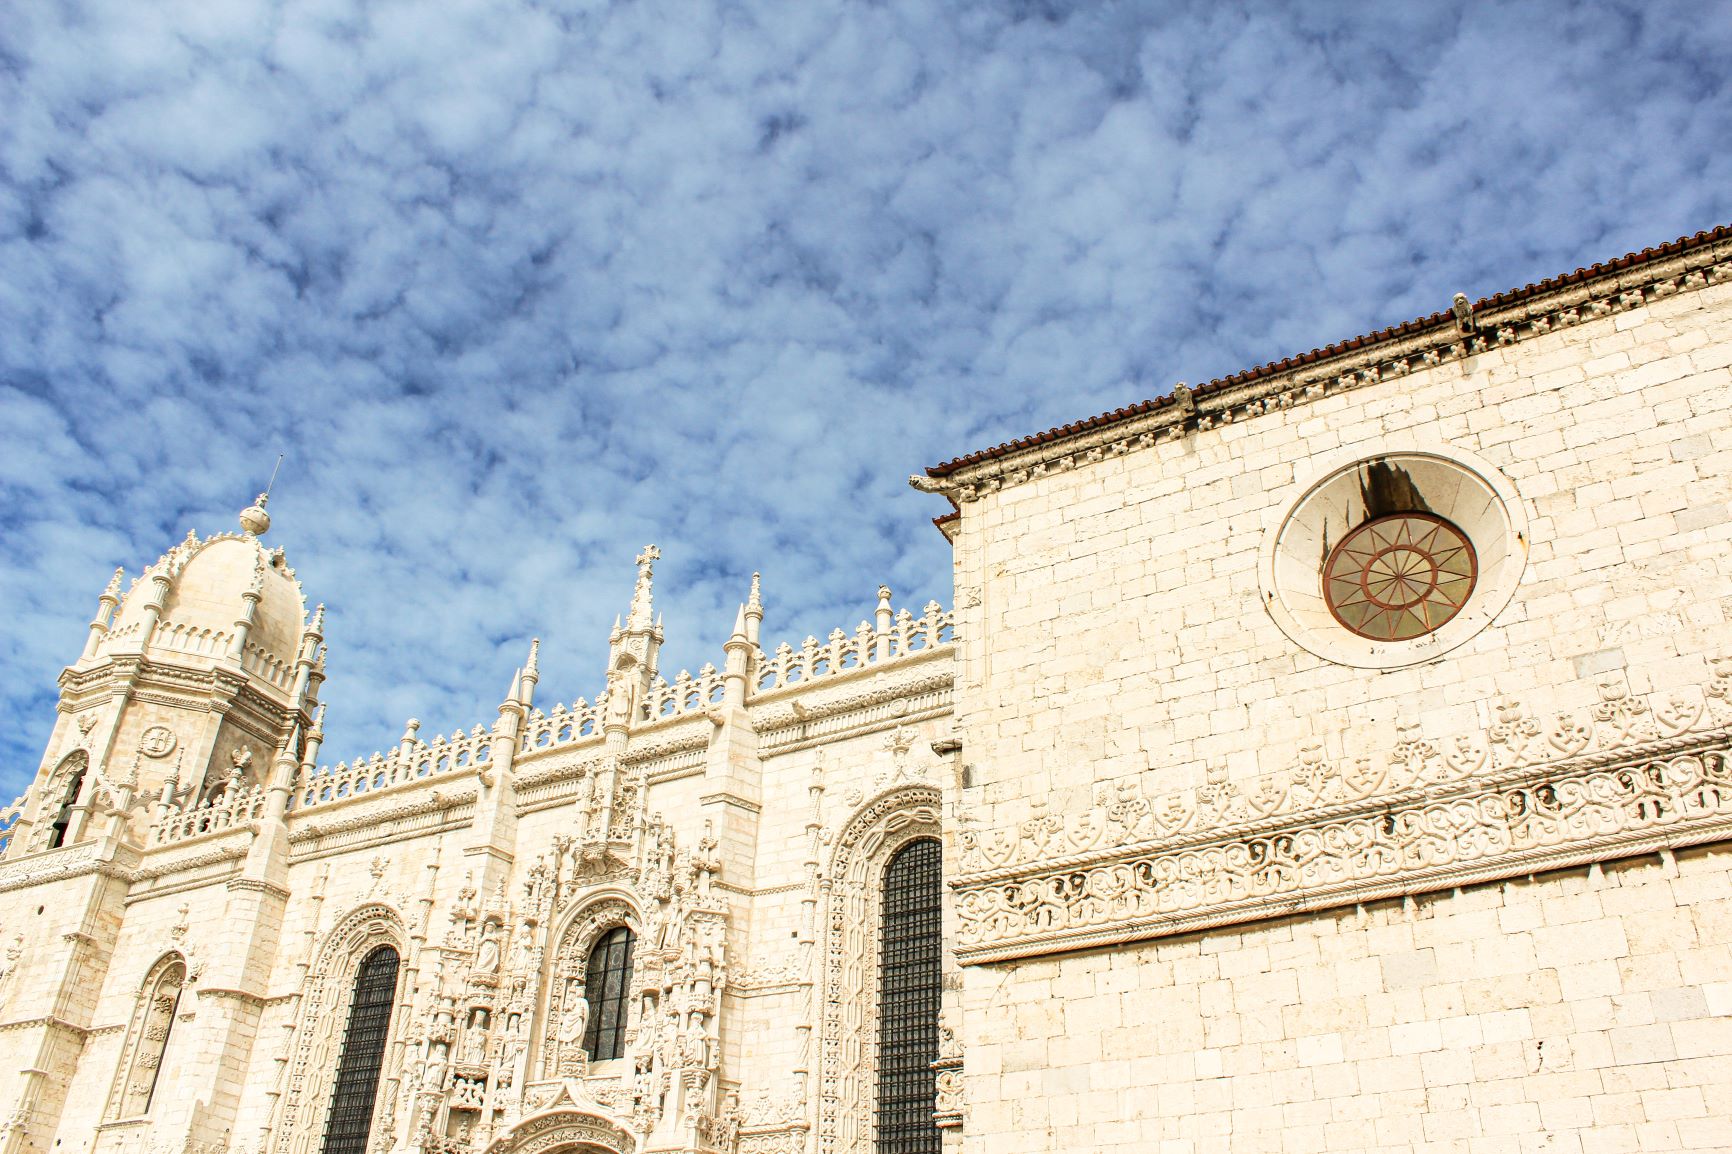 Visit one of Portugal's Seven Wonders and also a UNESCO World Heritage Site, Jeronimos Monastery in Lisbon